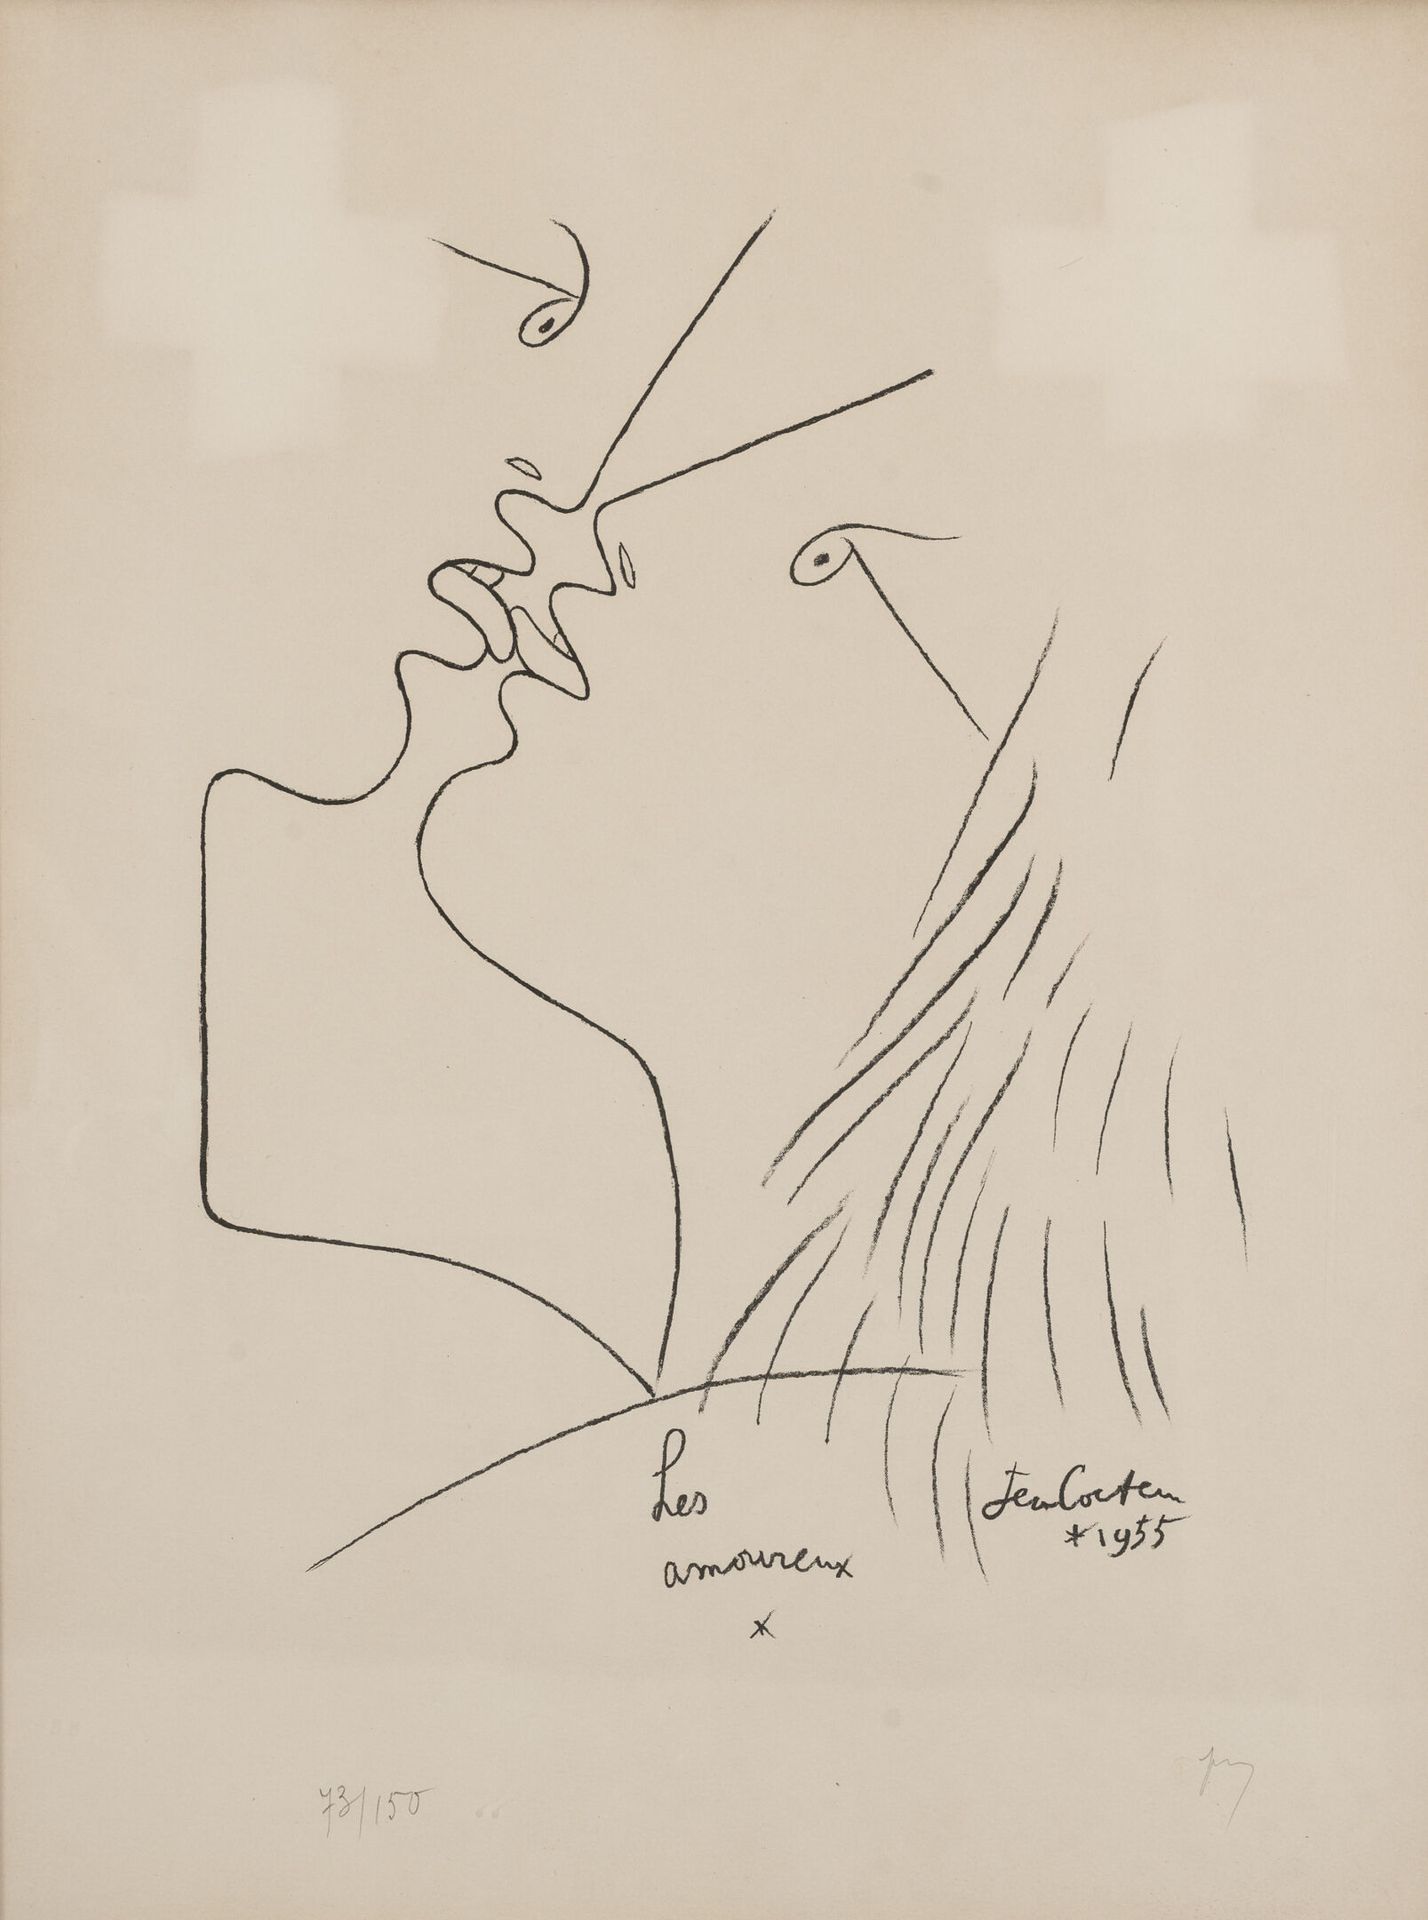 D'après Jean COCTEAU The lovers, 1955.
Lithograph on paper.
Numbered 73/150 and &hellip;